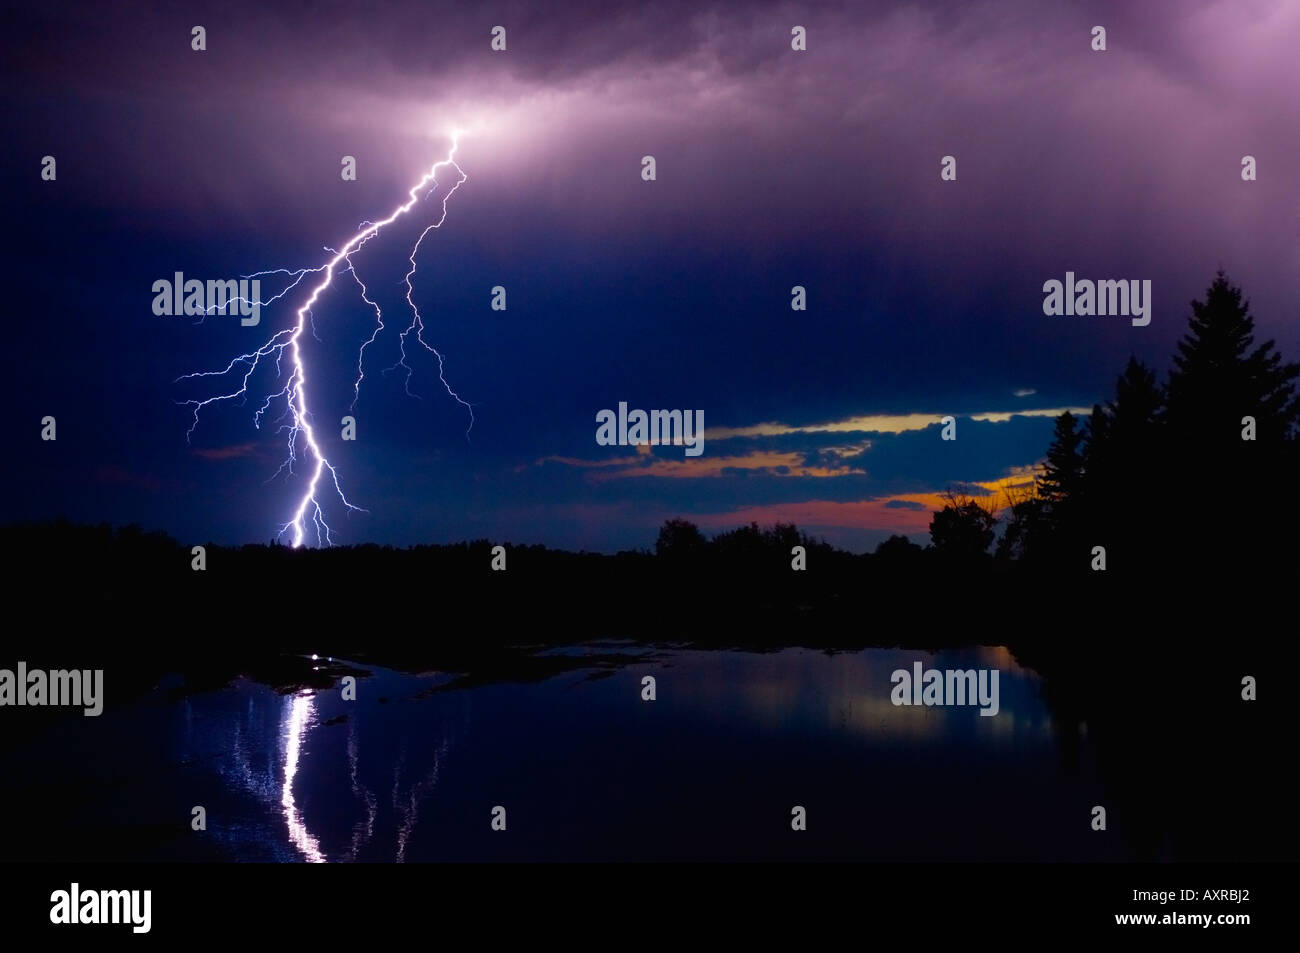 Lightning storm over a lake Stock Photo